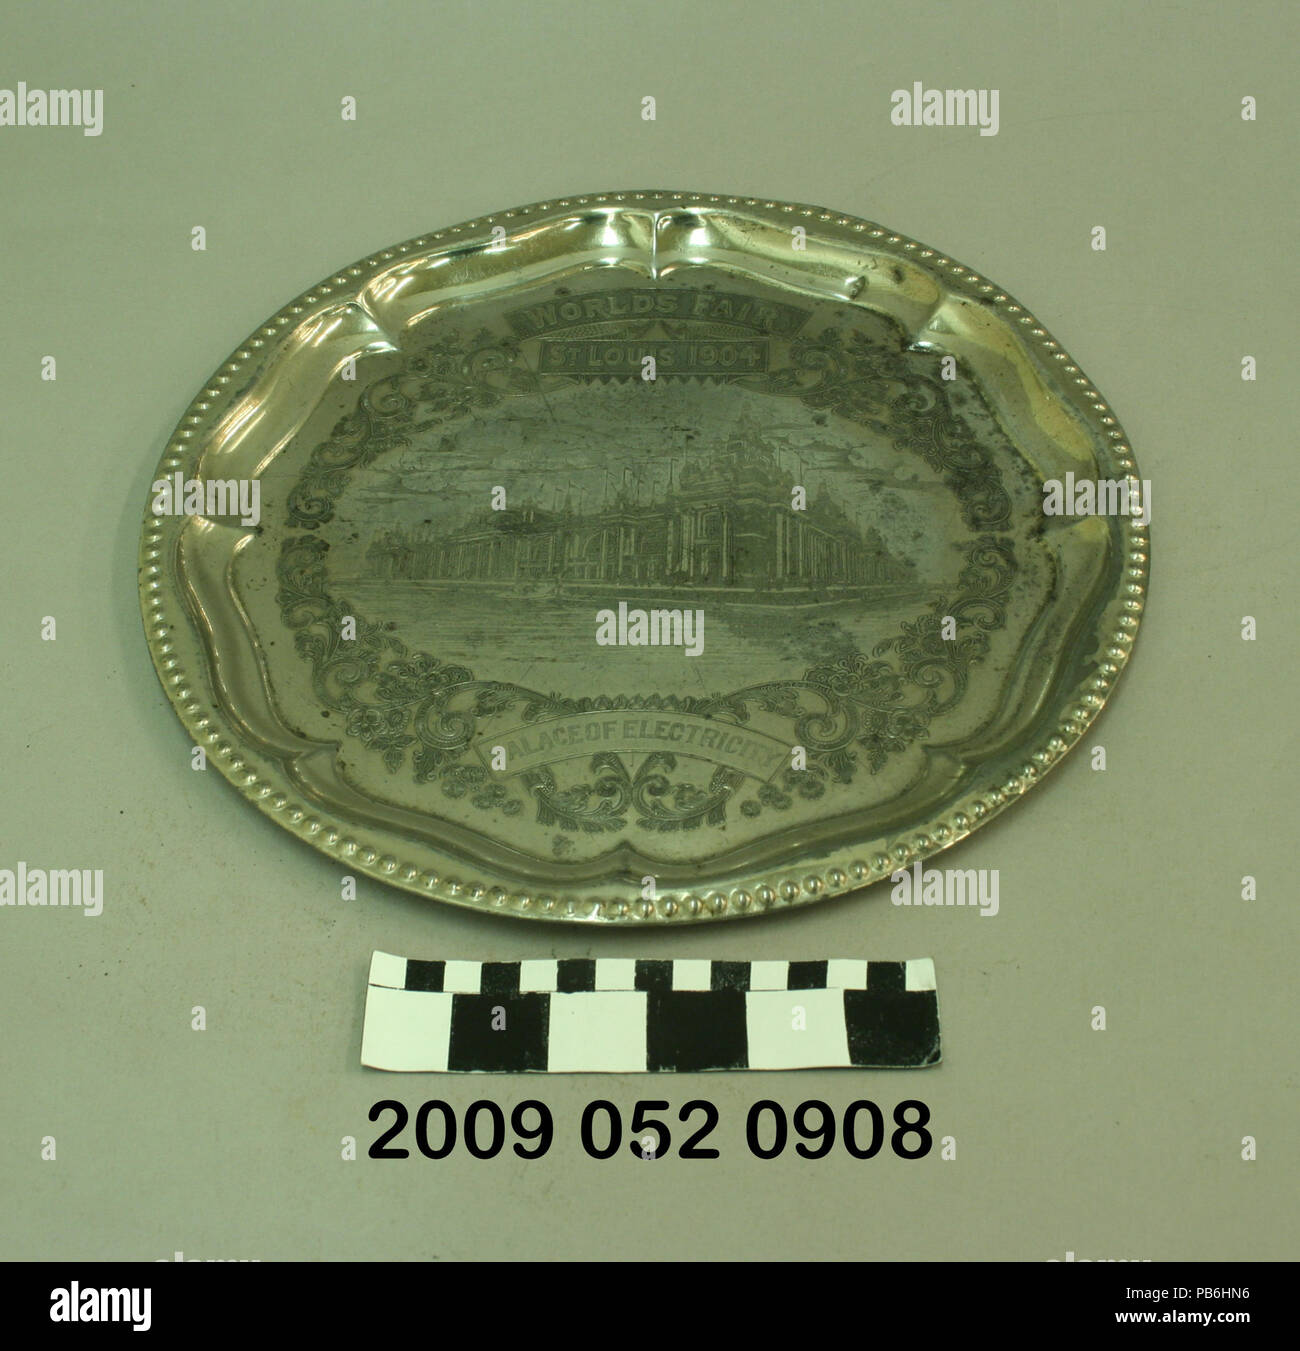 1273 Round Silverplate Tray With Relief Image of the Palace of Electricity Stock Photo